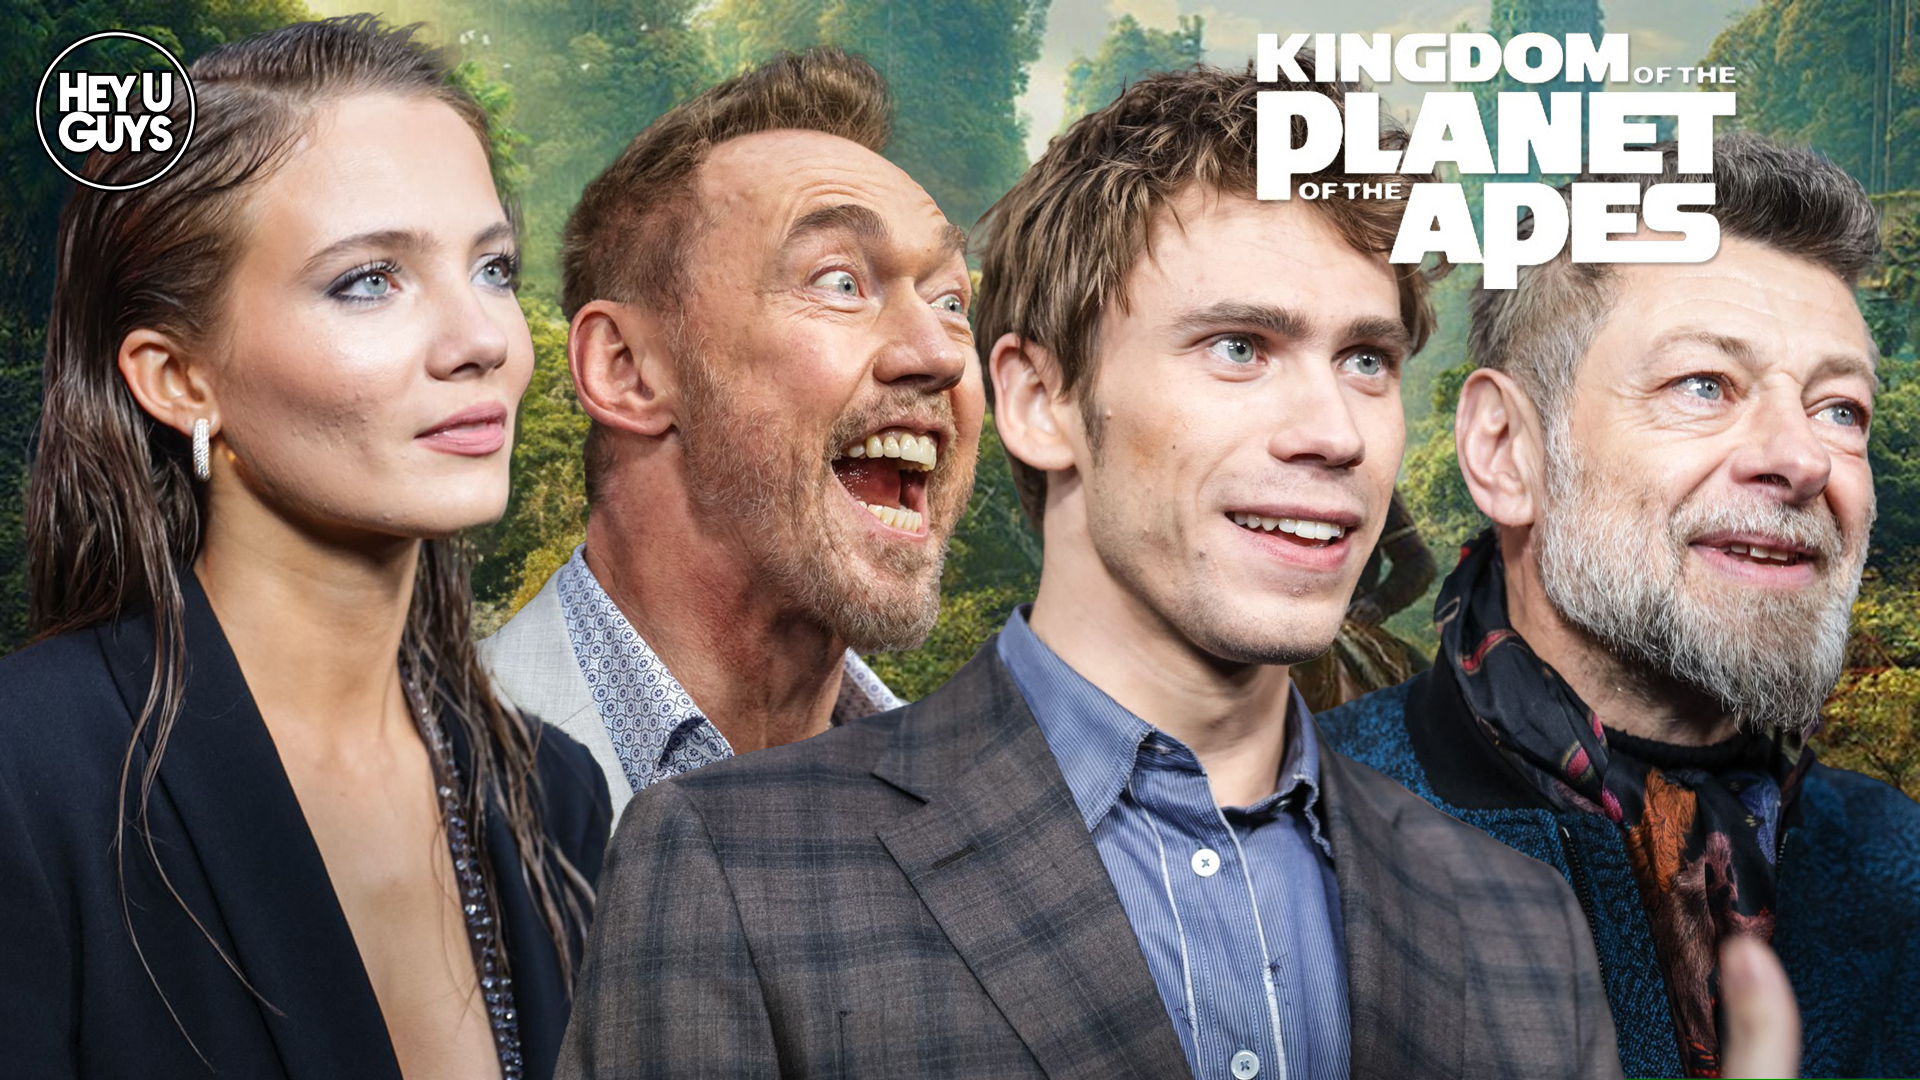 Kingdom-of-the-planet-of-the-apes-banner